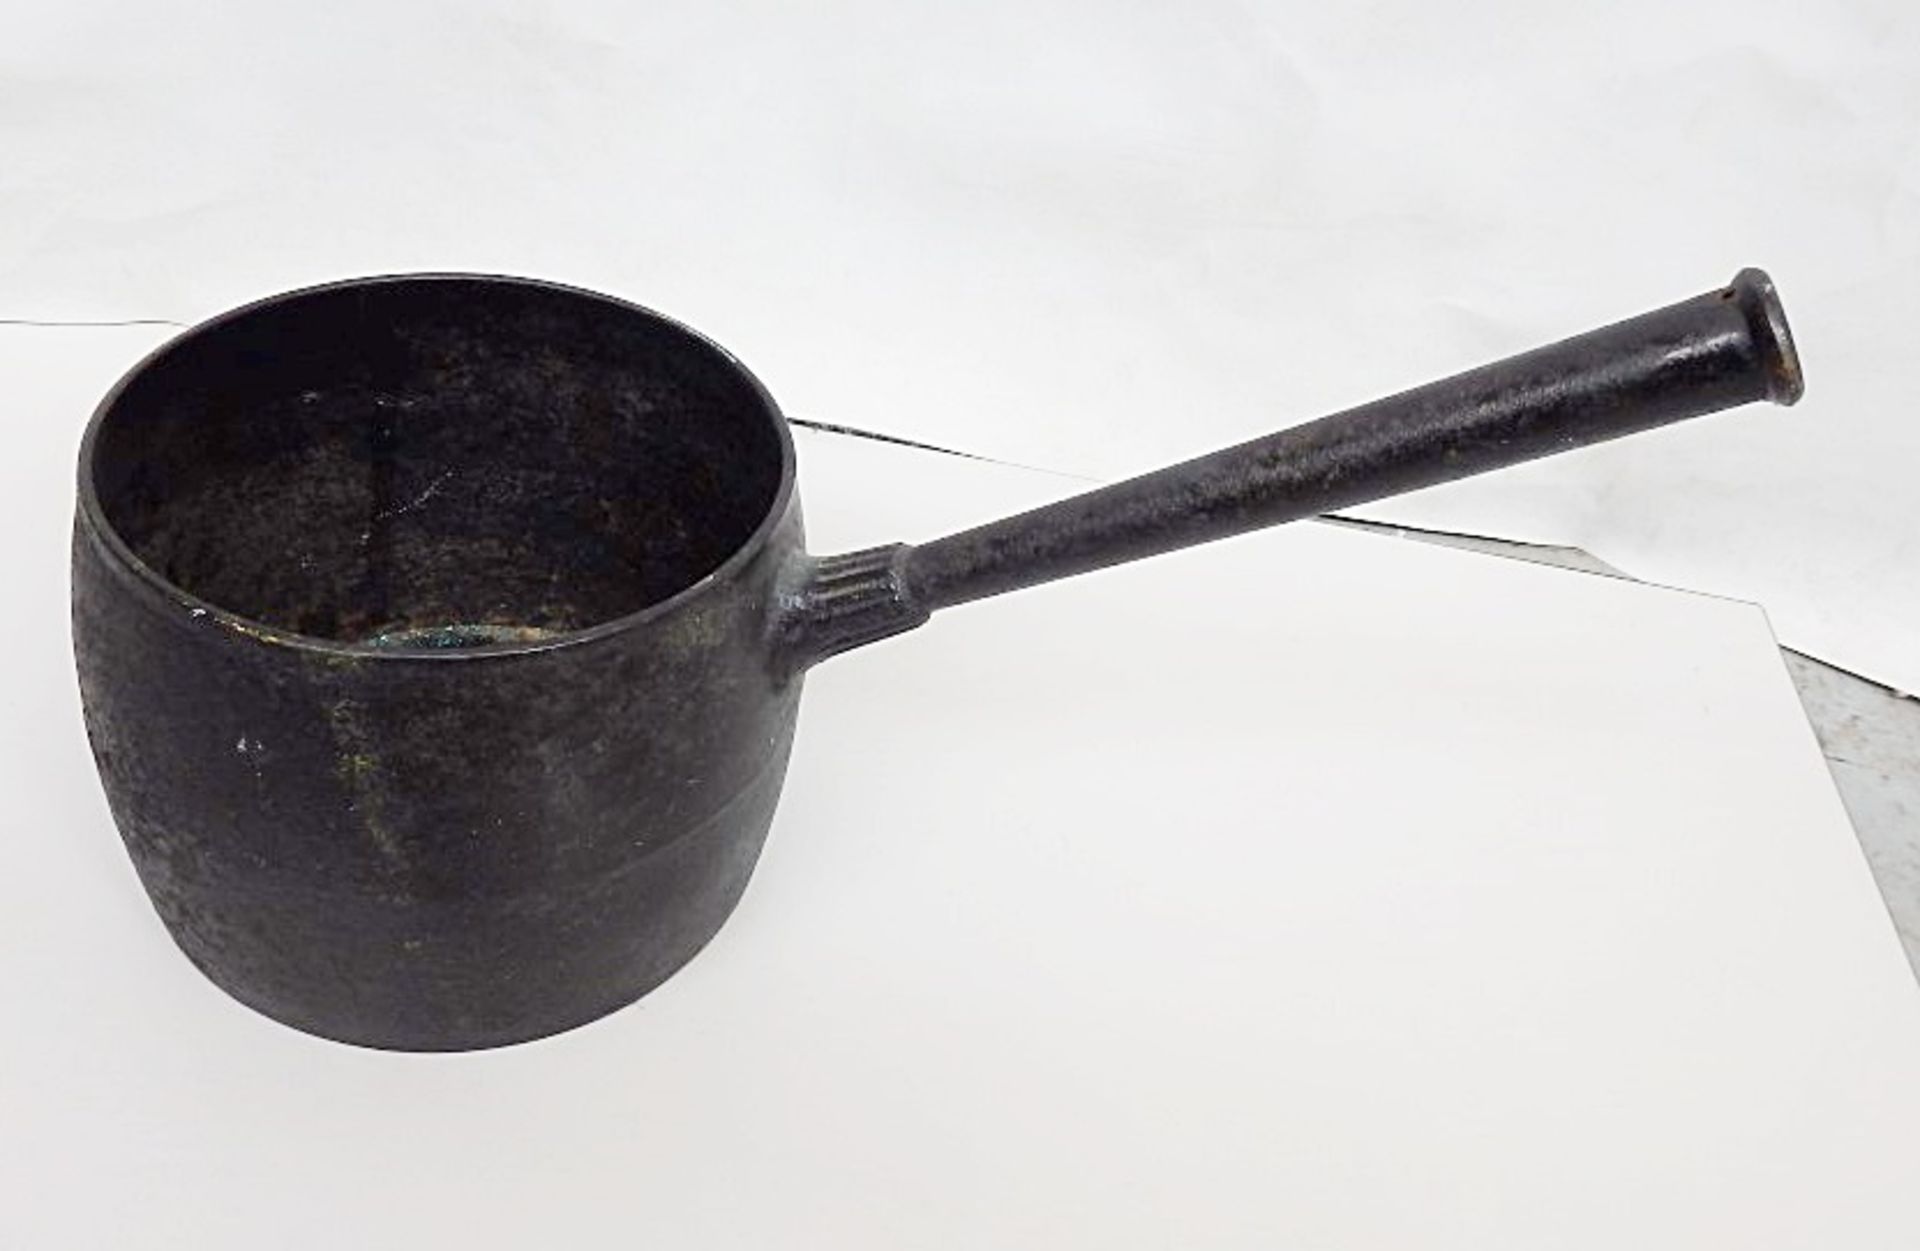 2 x Items Or Antique Kitchenware - Includes Kettle & Long-armed Pan - Both Very Heavy, Sturdy - Image 3 of 3